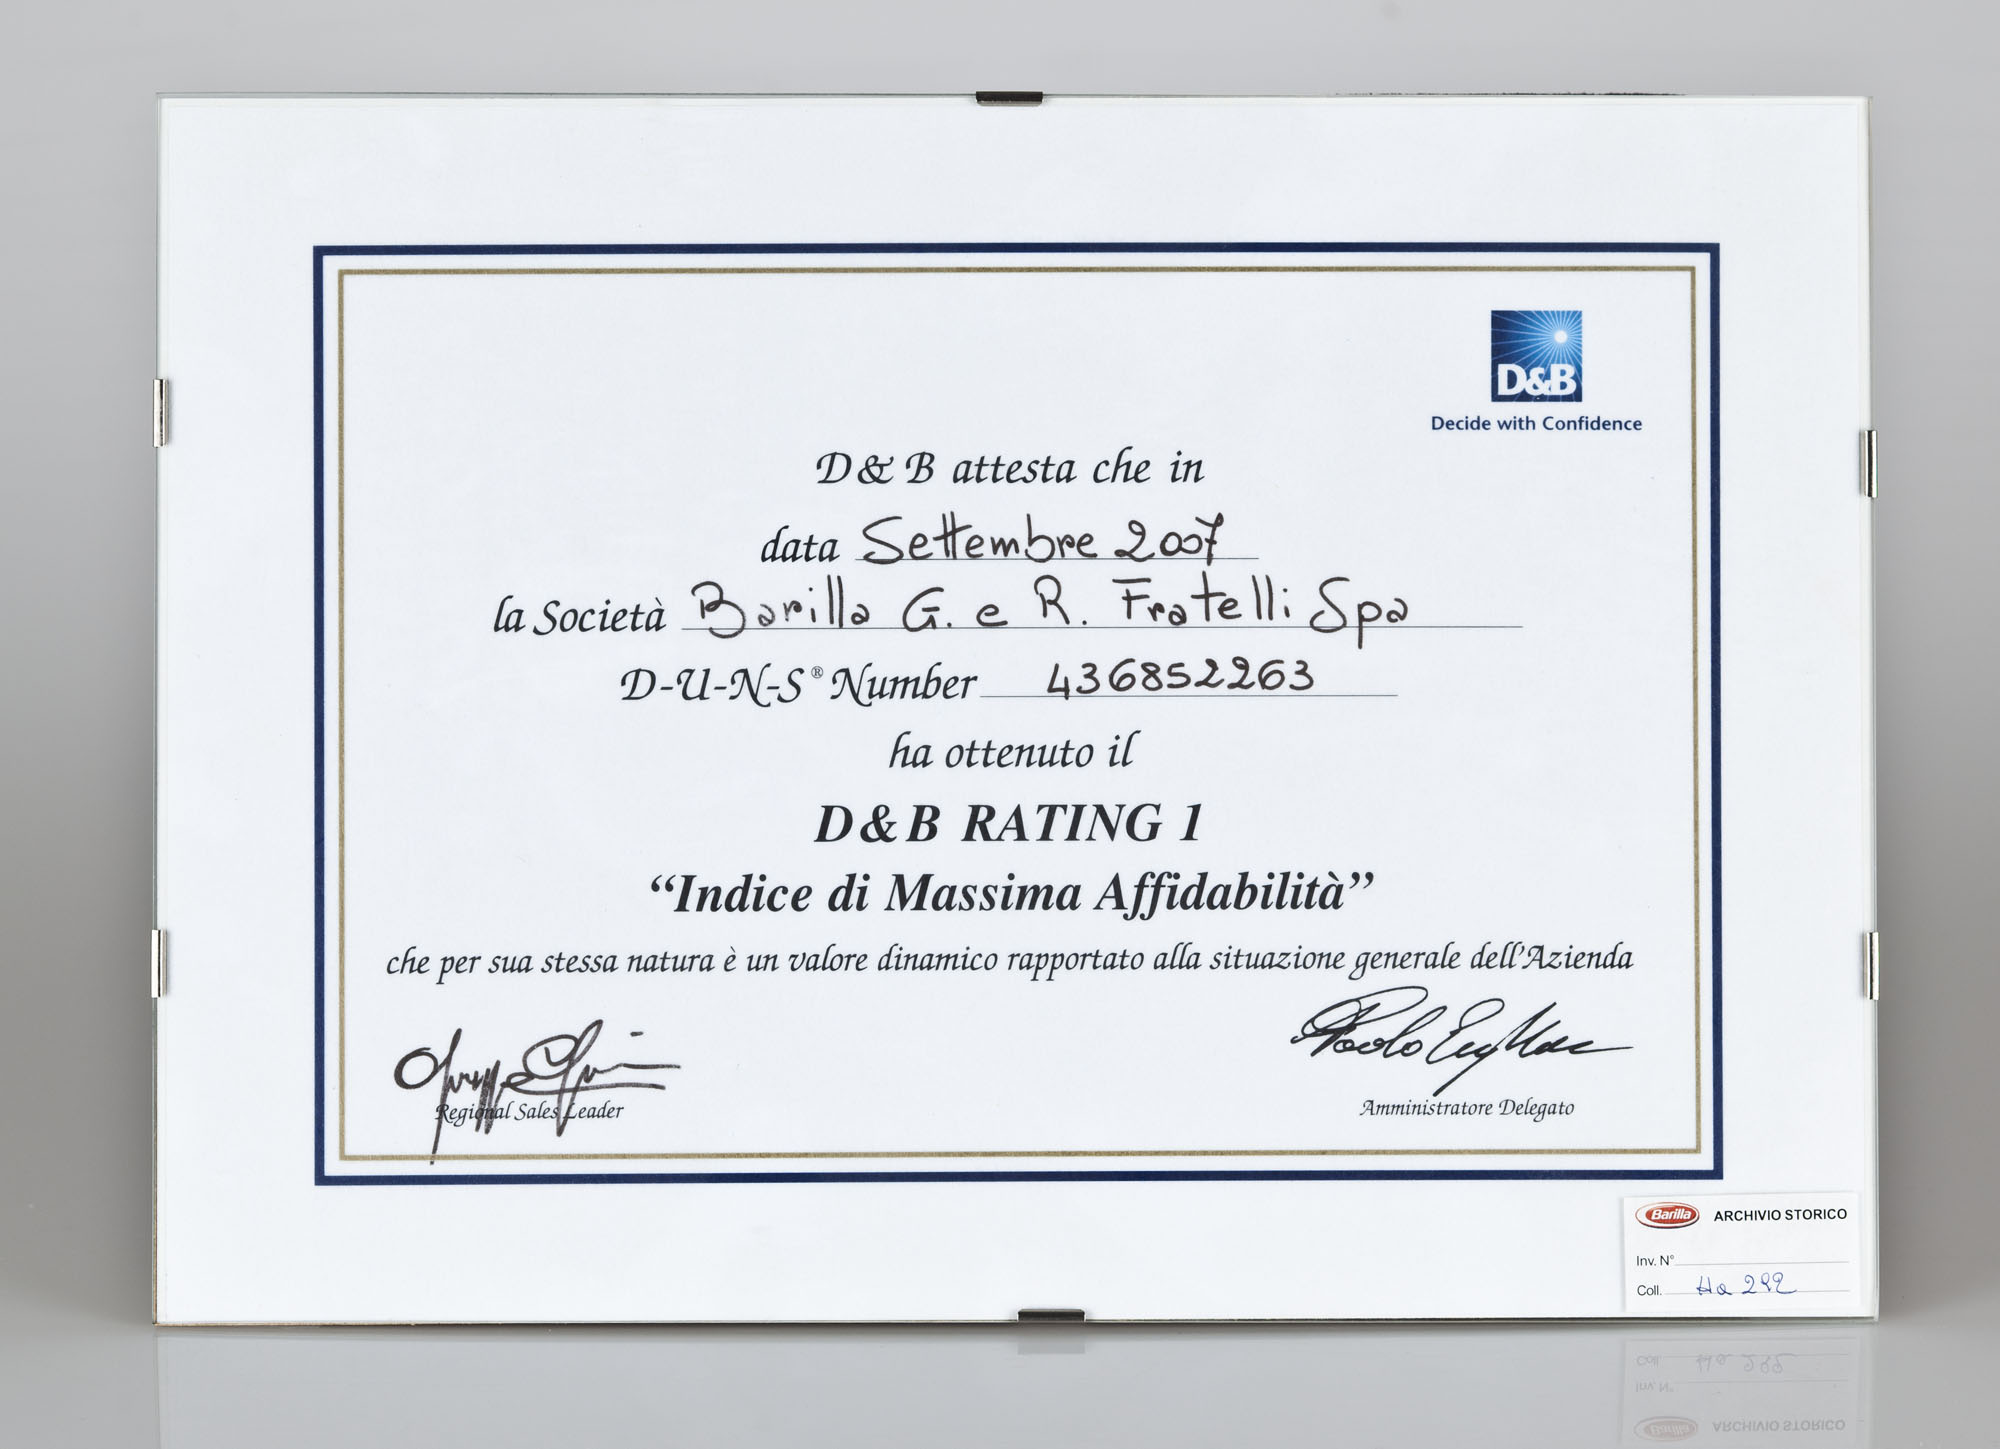 2007 - "D & B RATING 1 Index of top reliability" - Honor given to Barilla for its top reliability